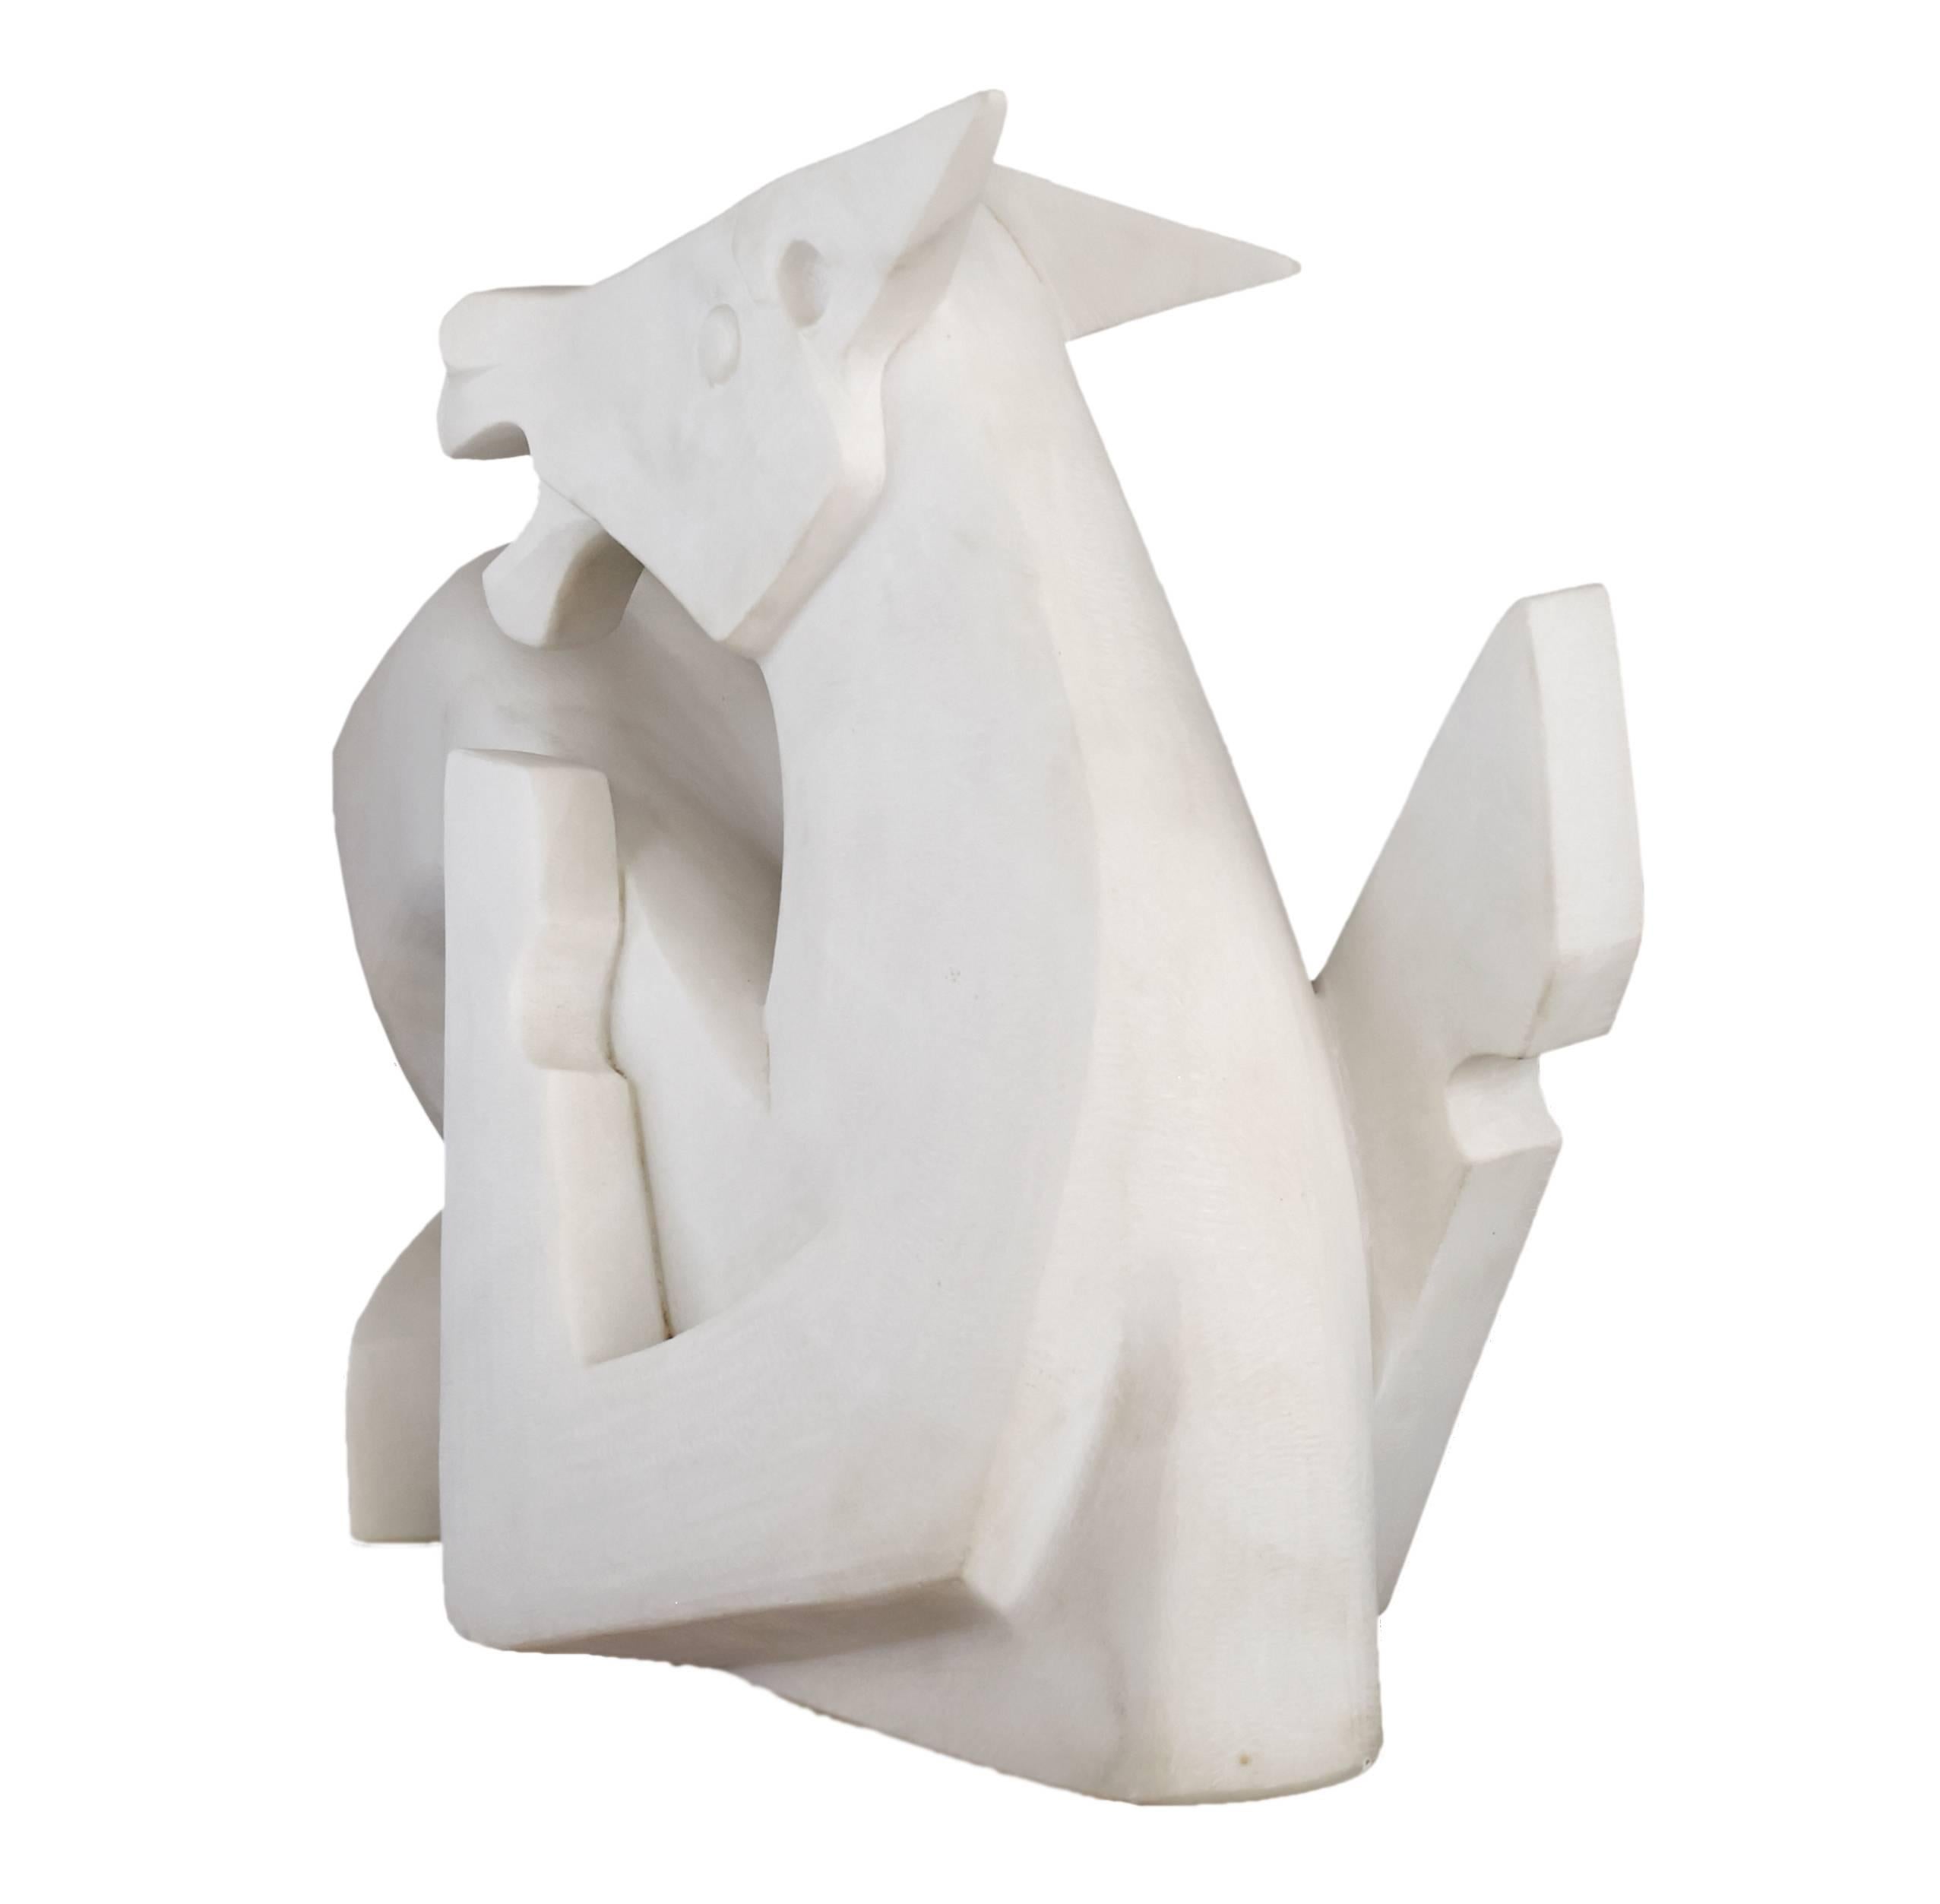 Abstract white marble carved horse sculpture signed on bottom.
Can be displayed from either angle.
Signed on lower side of sculpture but cannot determine artist's name.